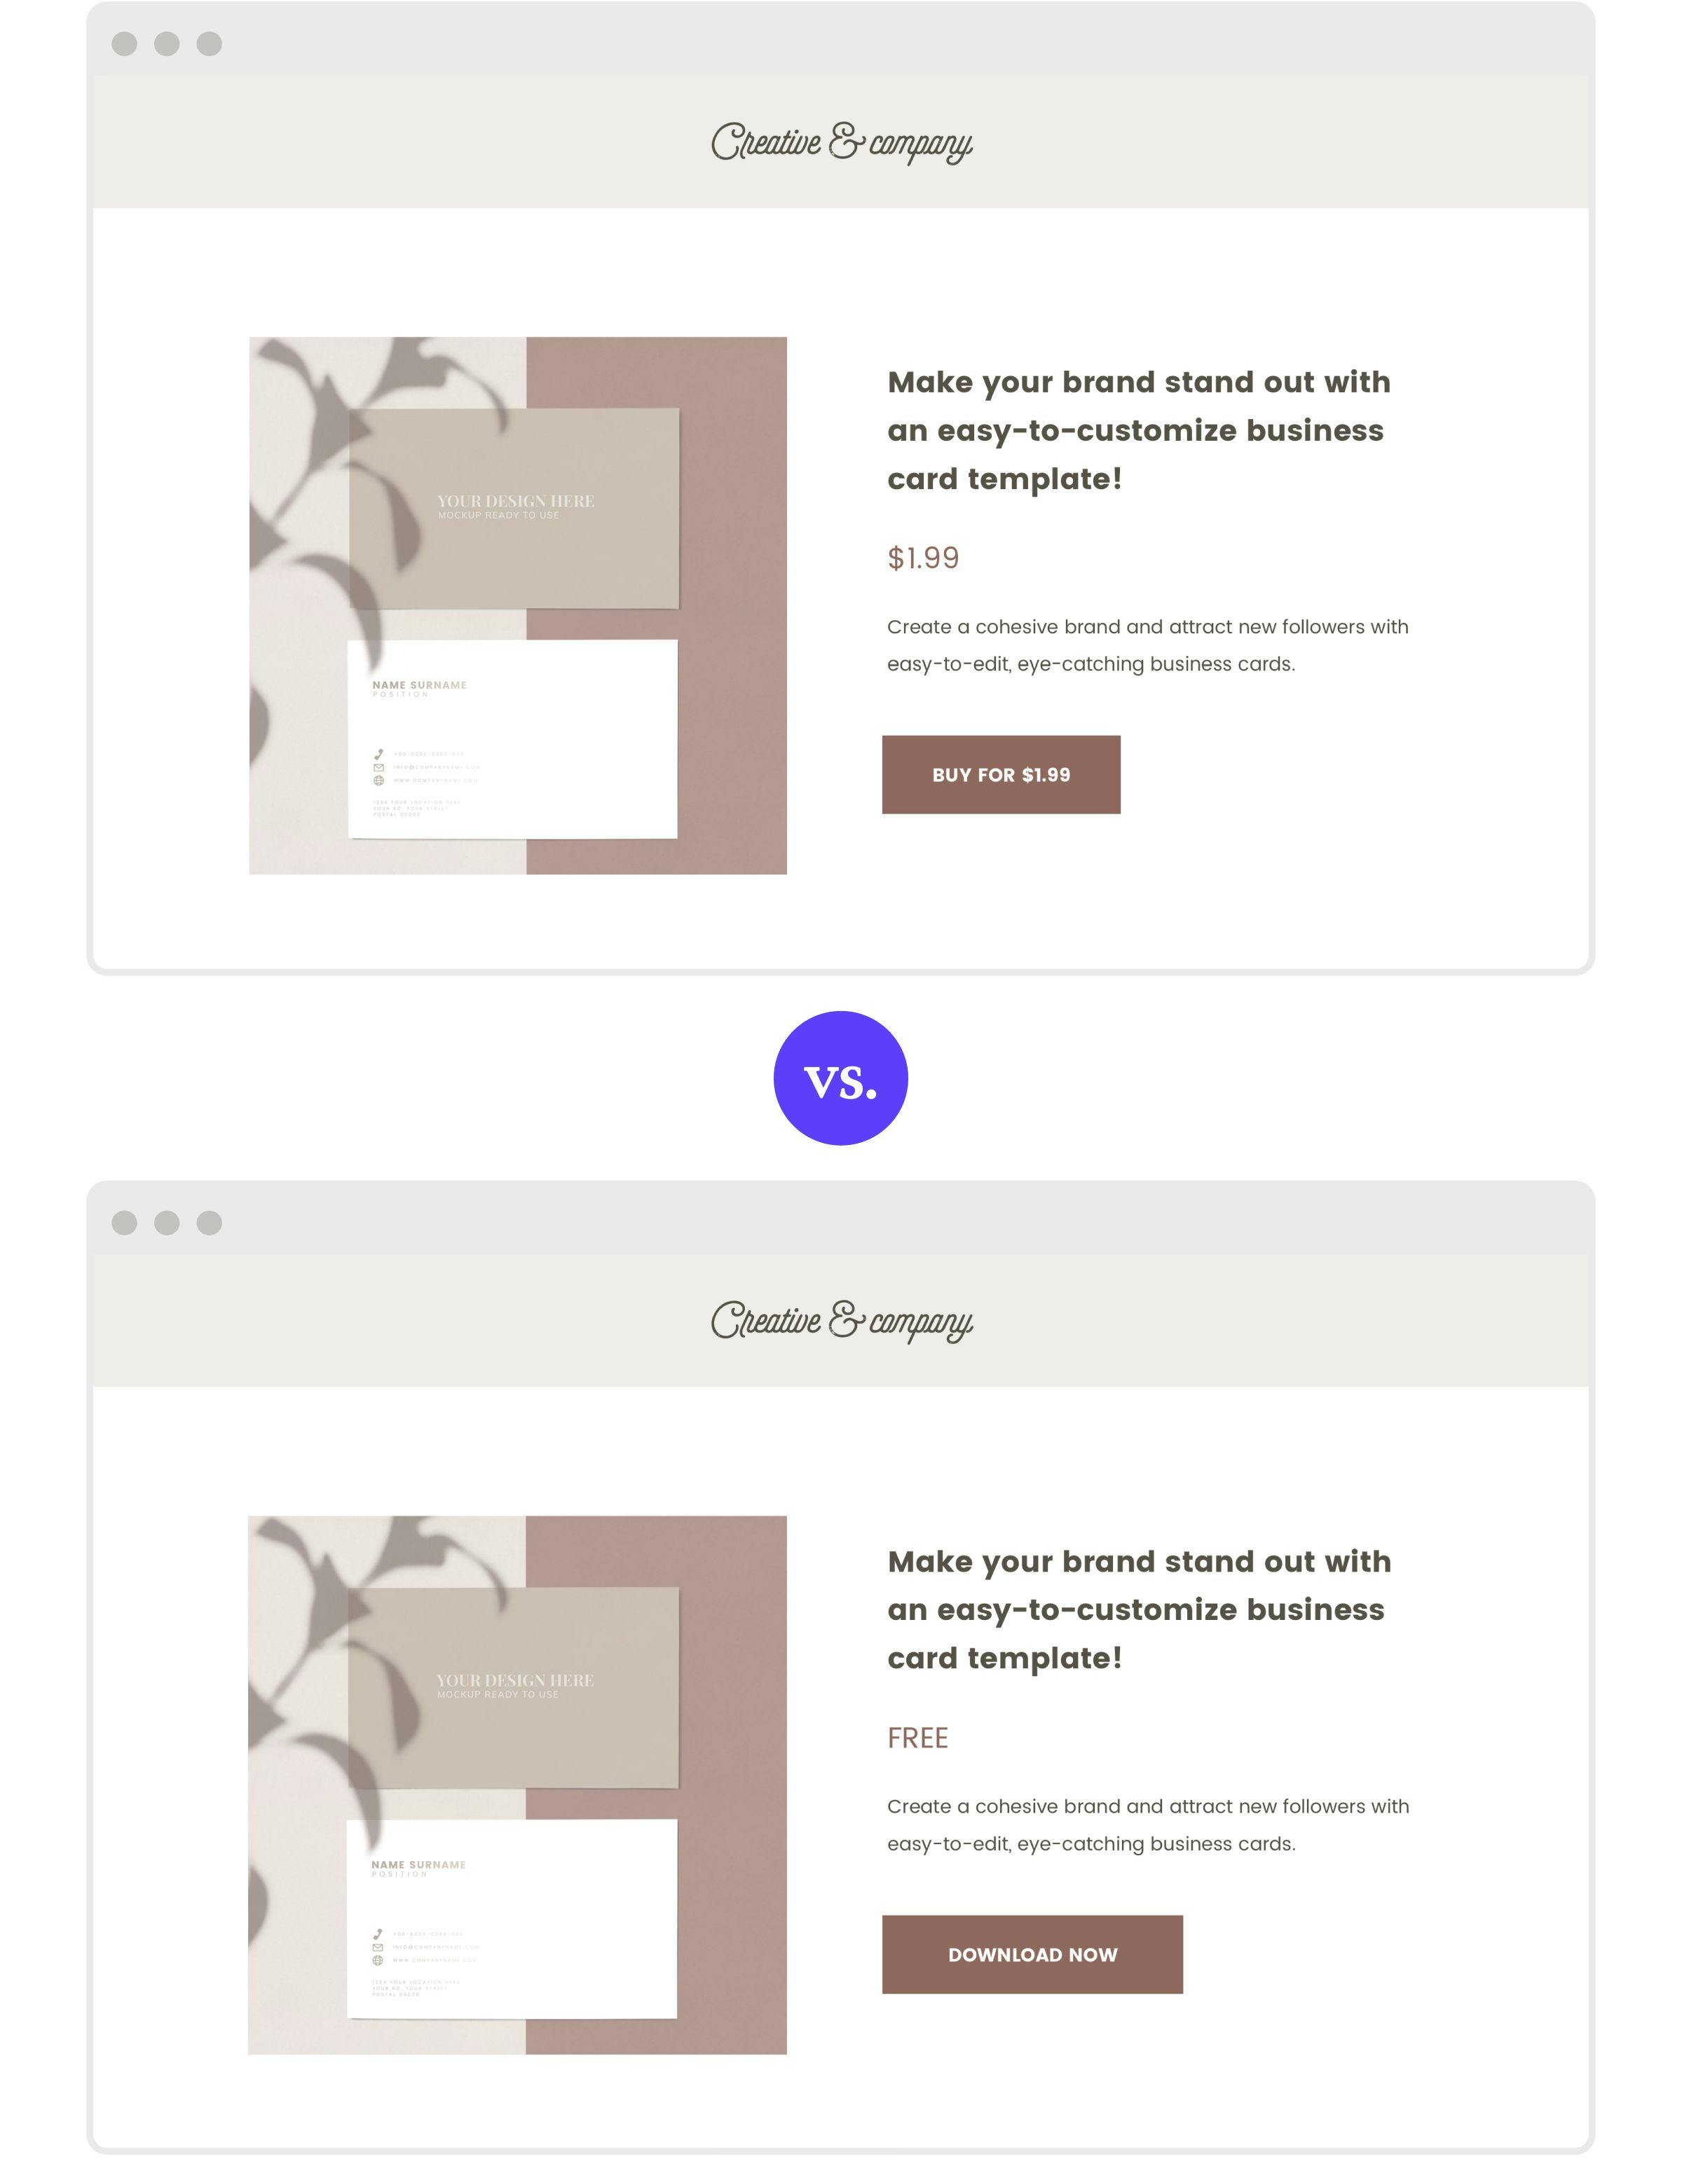 A/B testing landing page offer or price